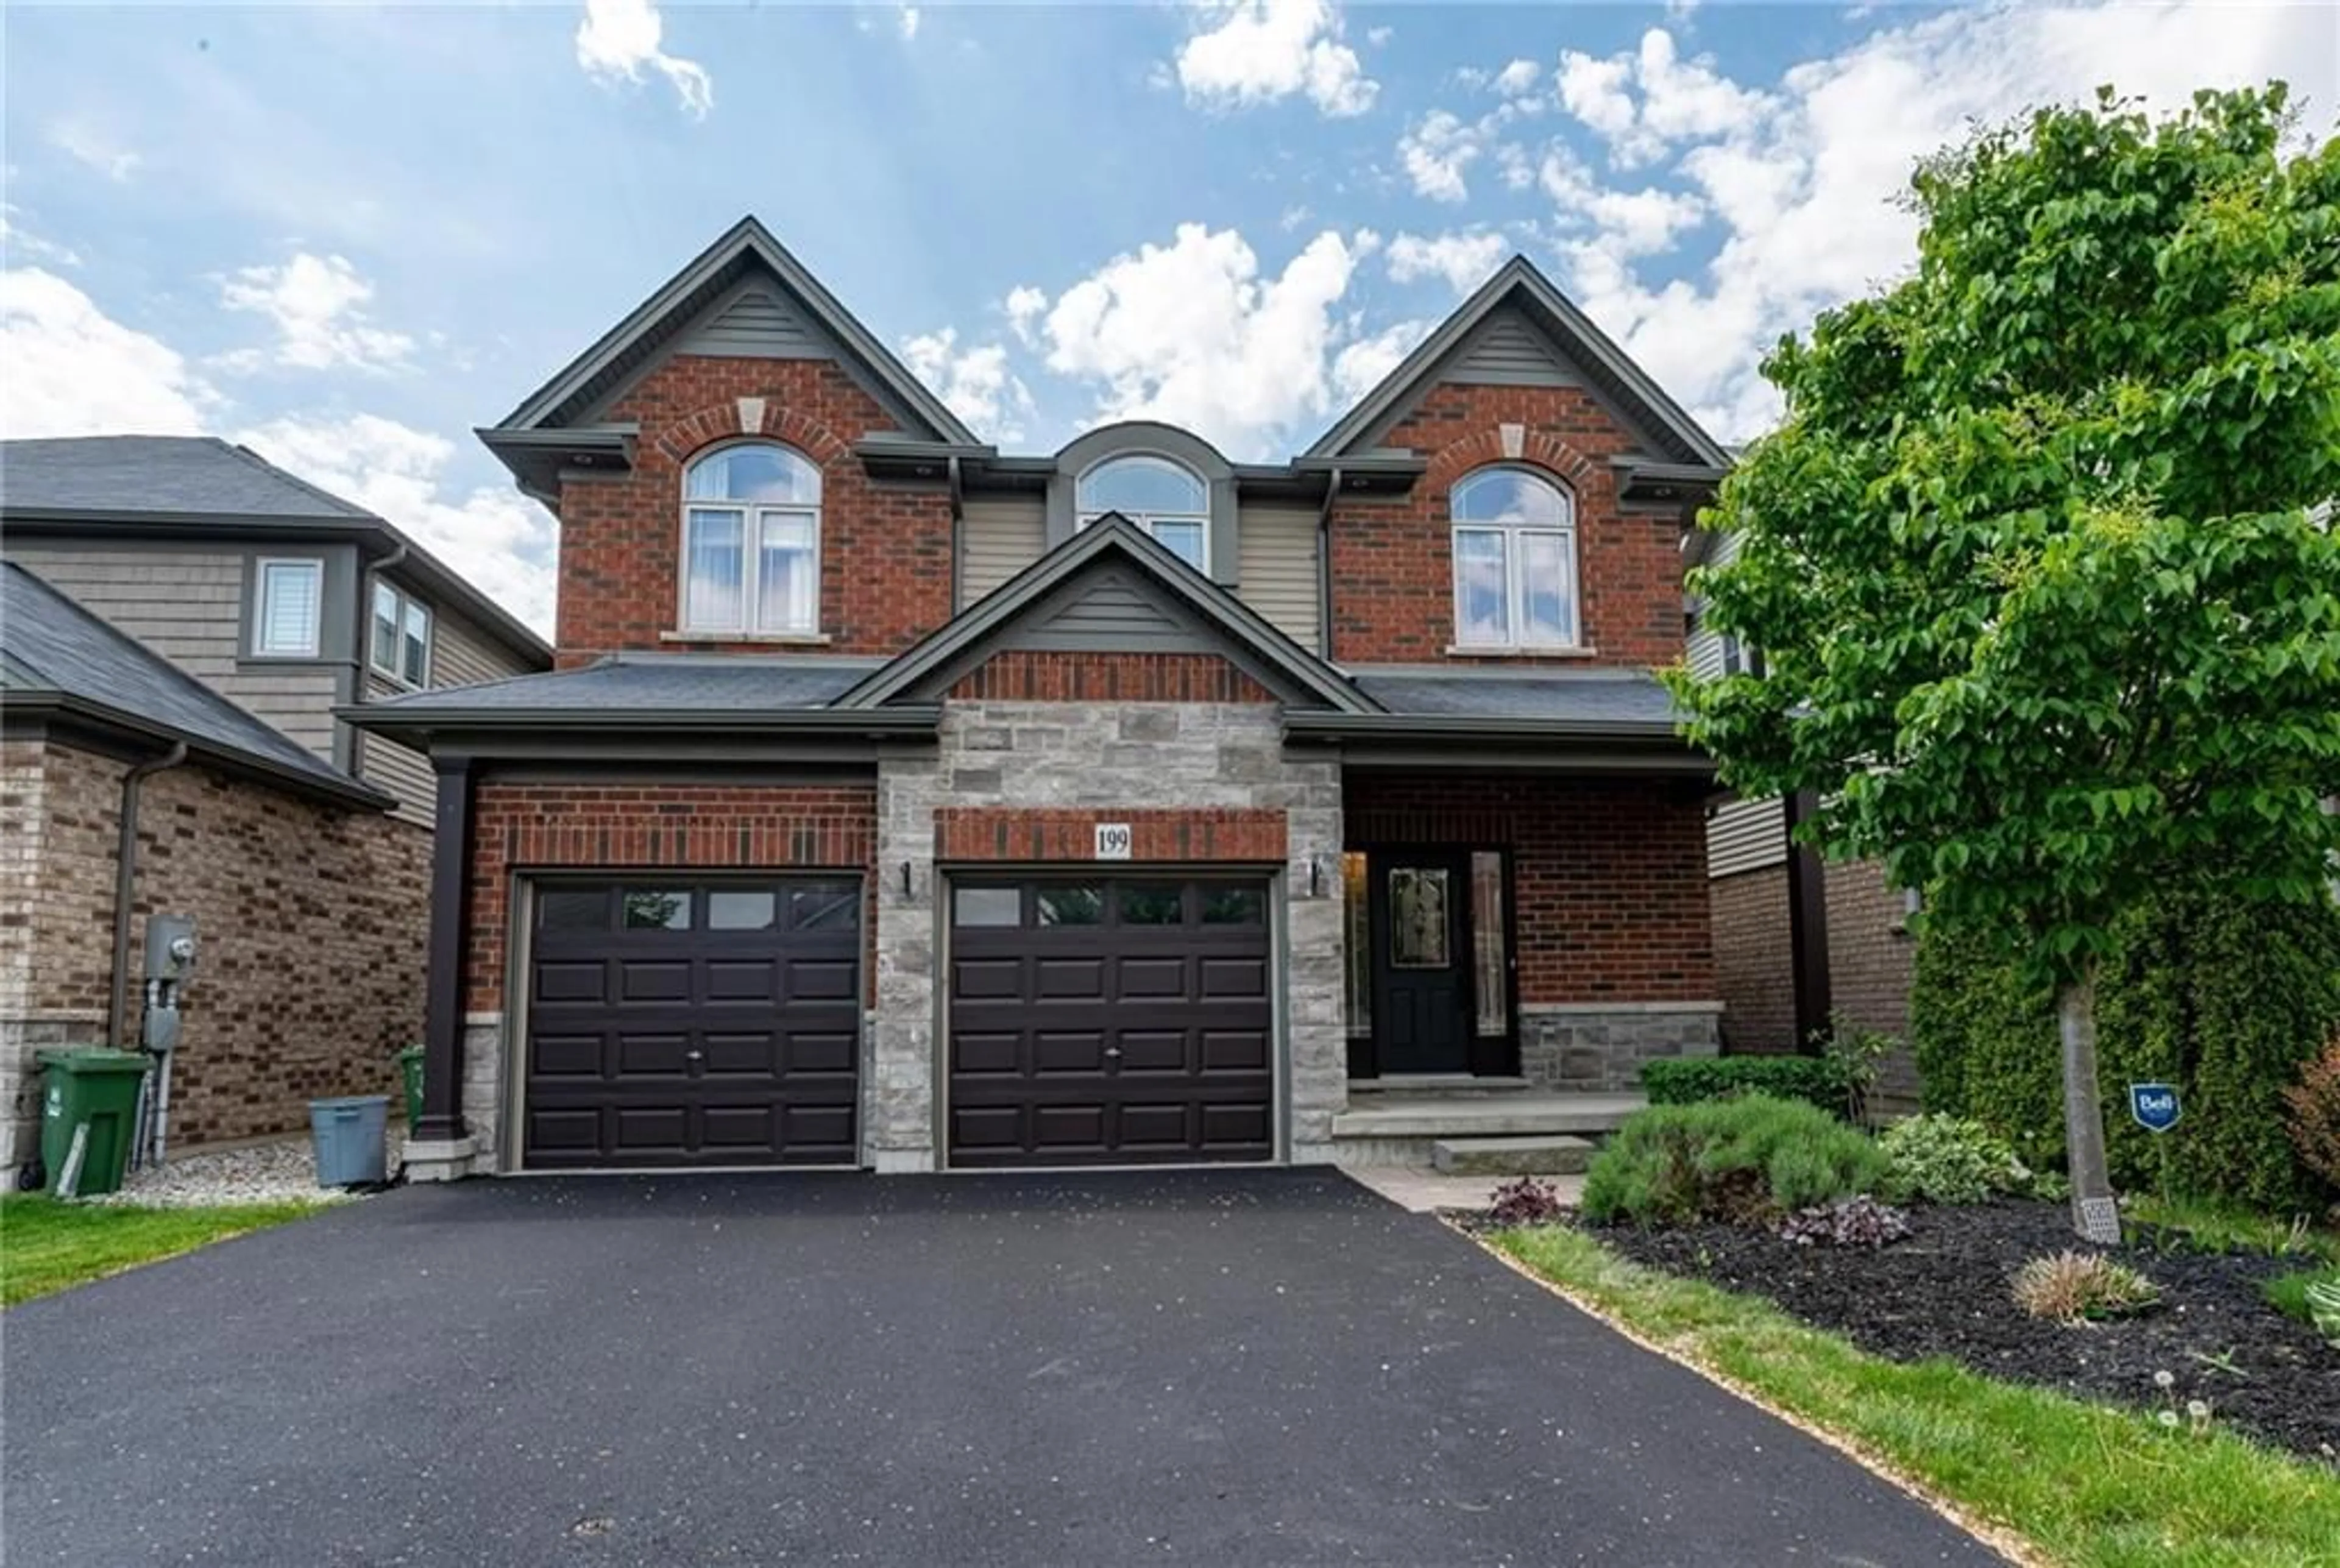 Home with brick exterior material for 199 Festival Way, Binbrook Ontario L0R 1C0